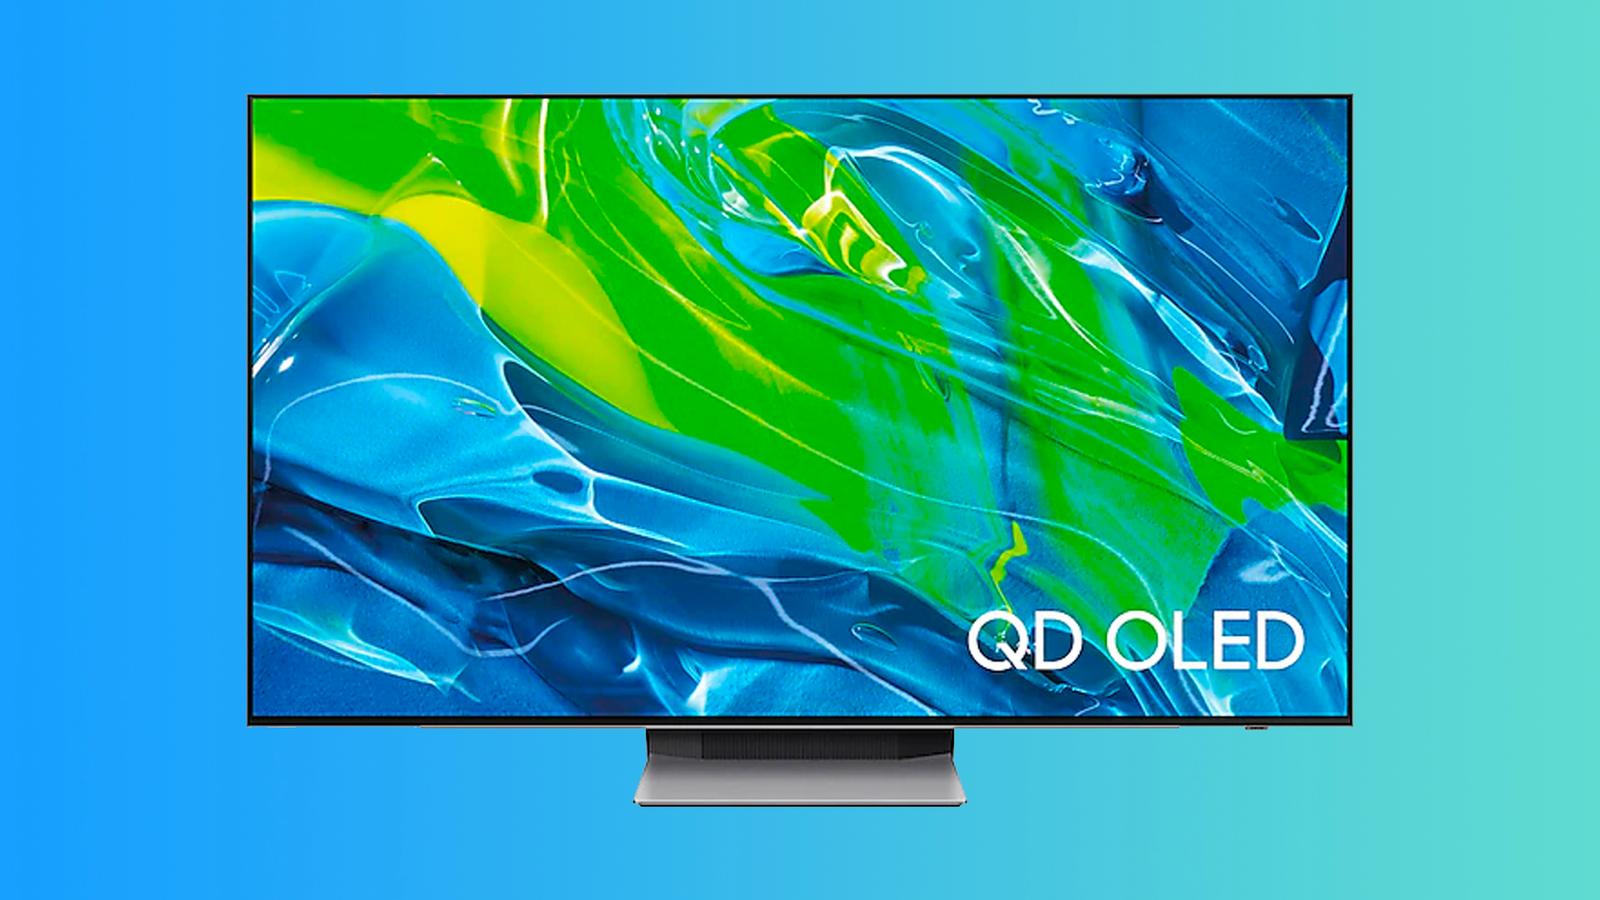 Best 4K 120Hz gaming TV - An image of the Samsung S95B